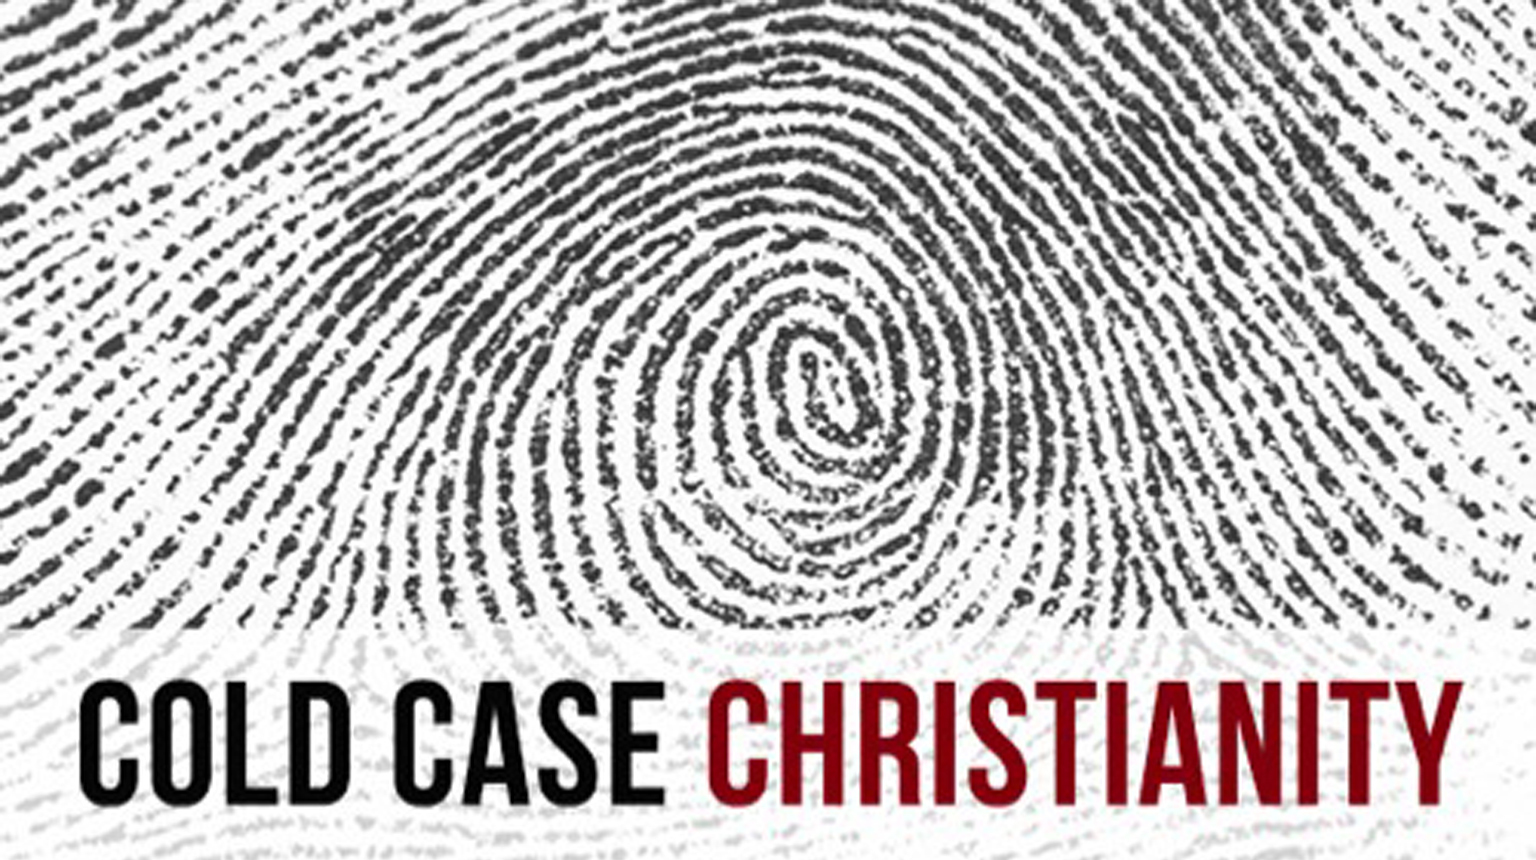 You Can Believe Because of the Evidence, Not in Spite of It – A Review of Cold Case Christianity